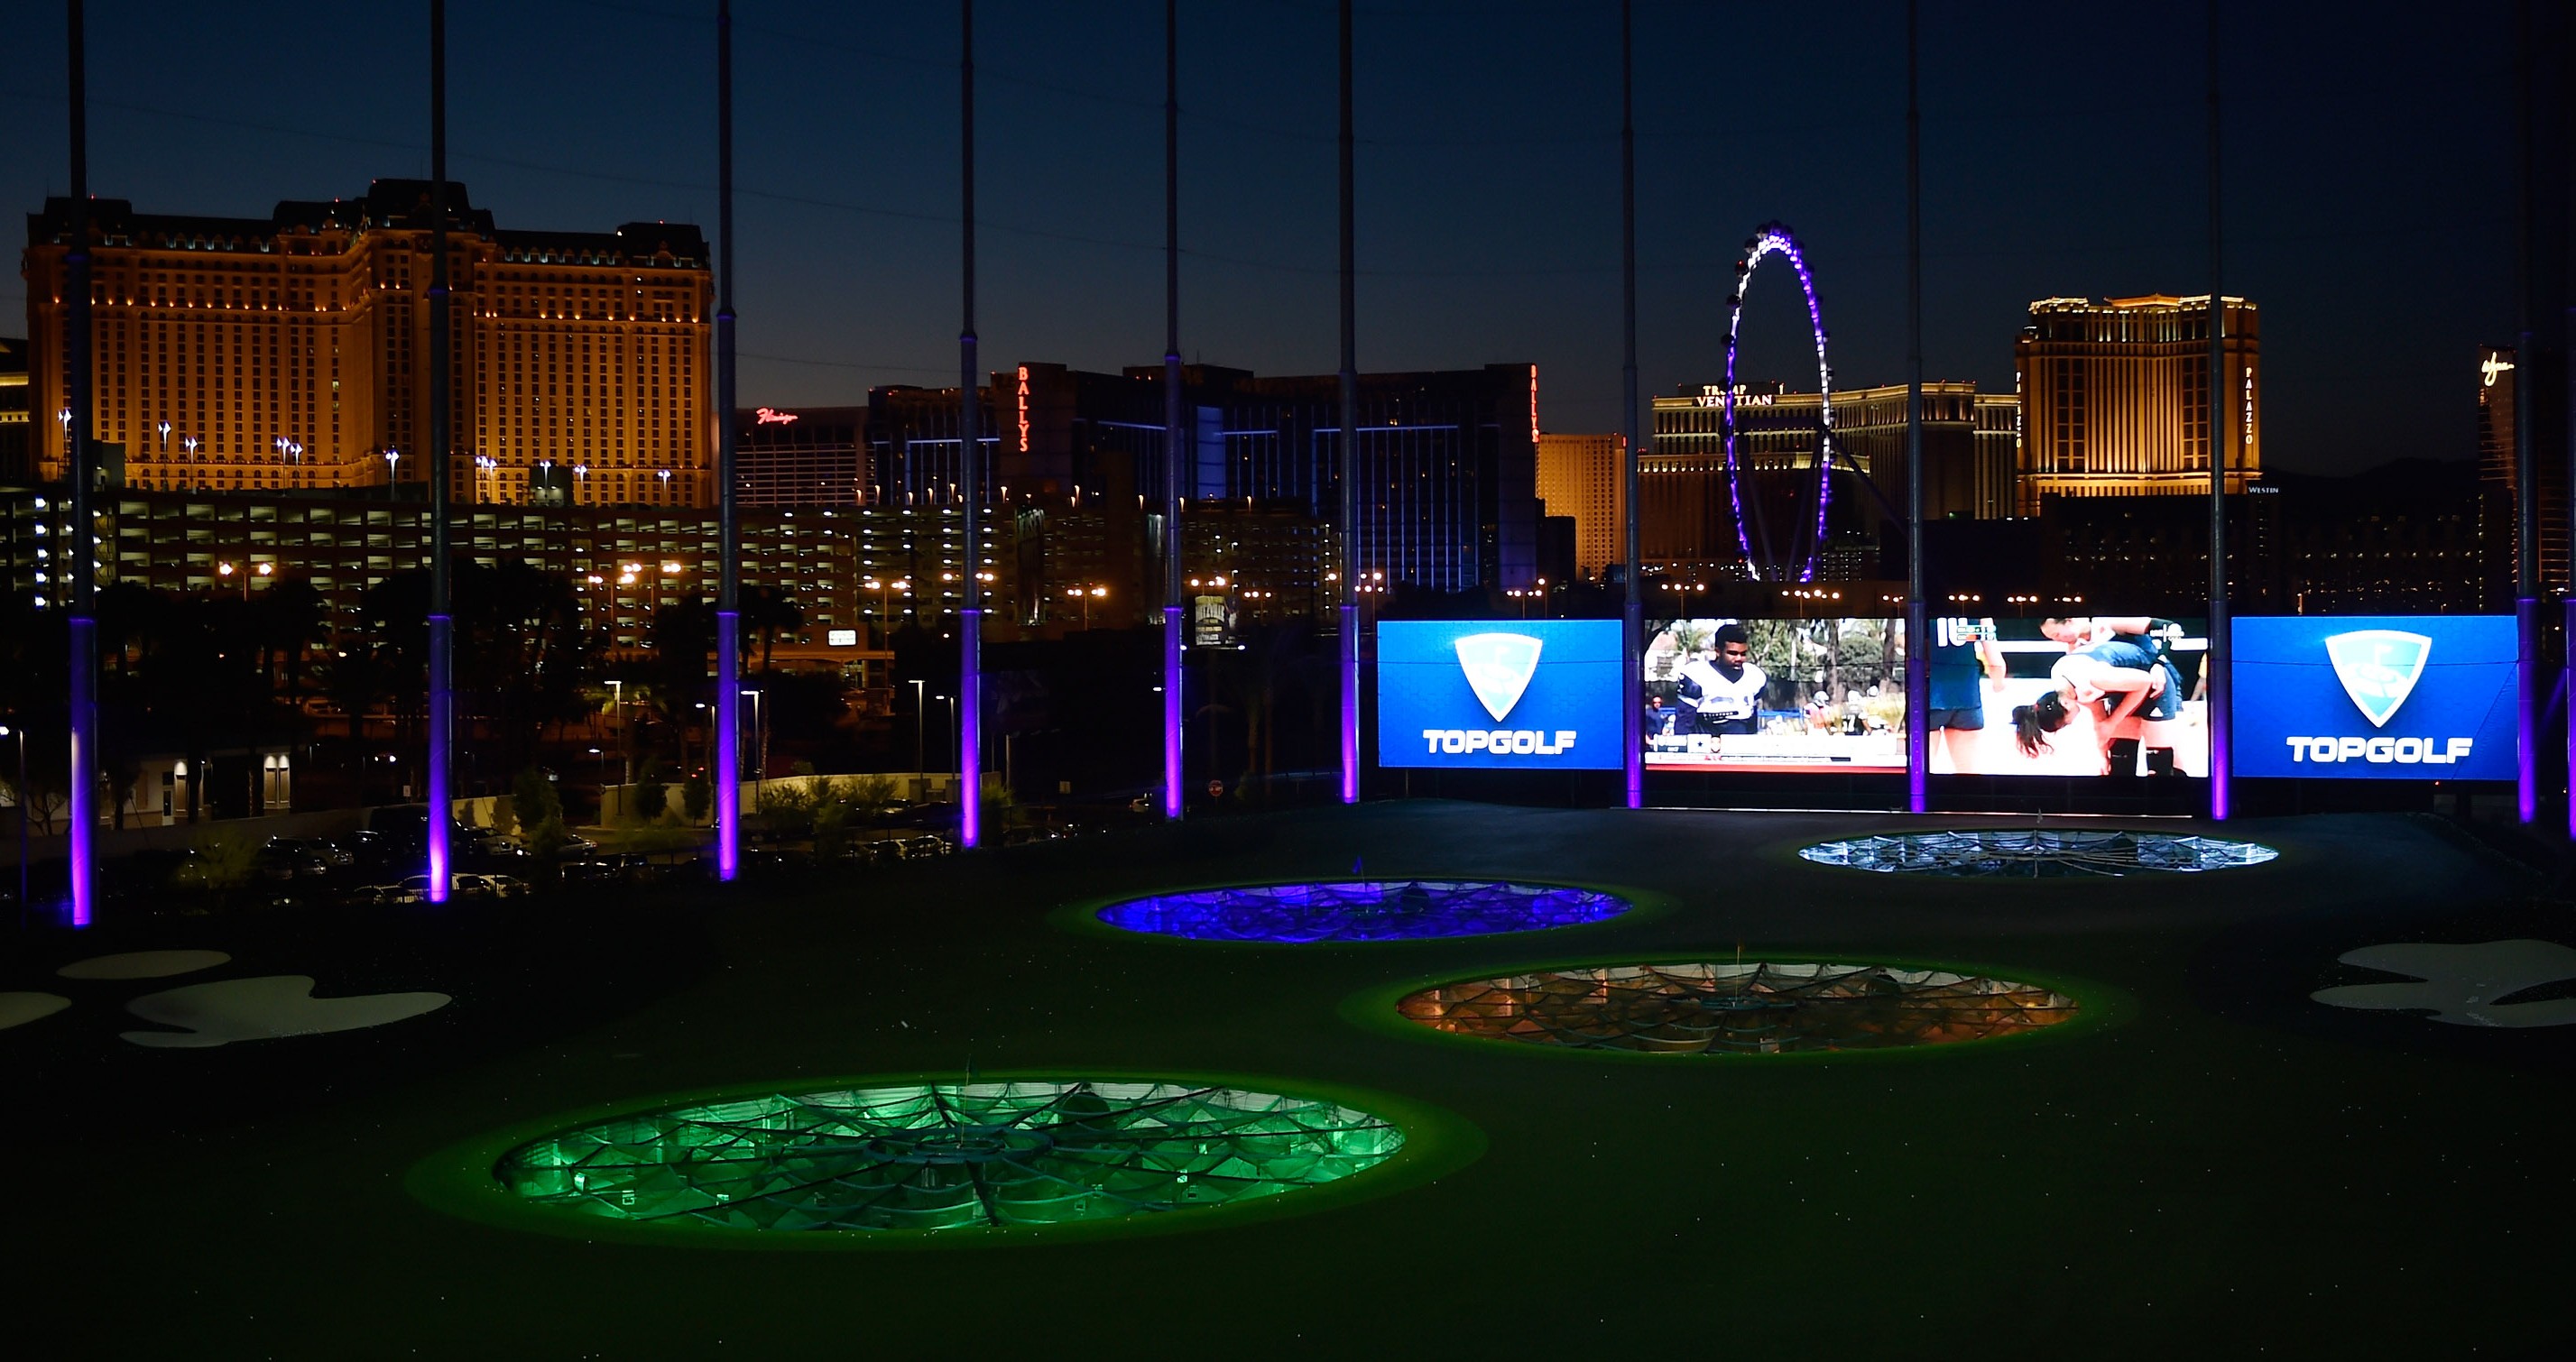 The Writers Cup A weekend of golf and all the best of Vegas Sporting